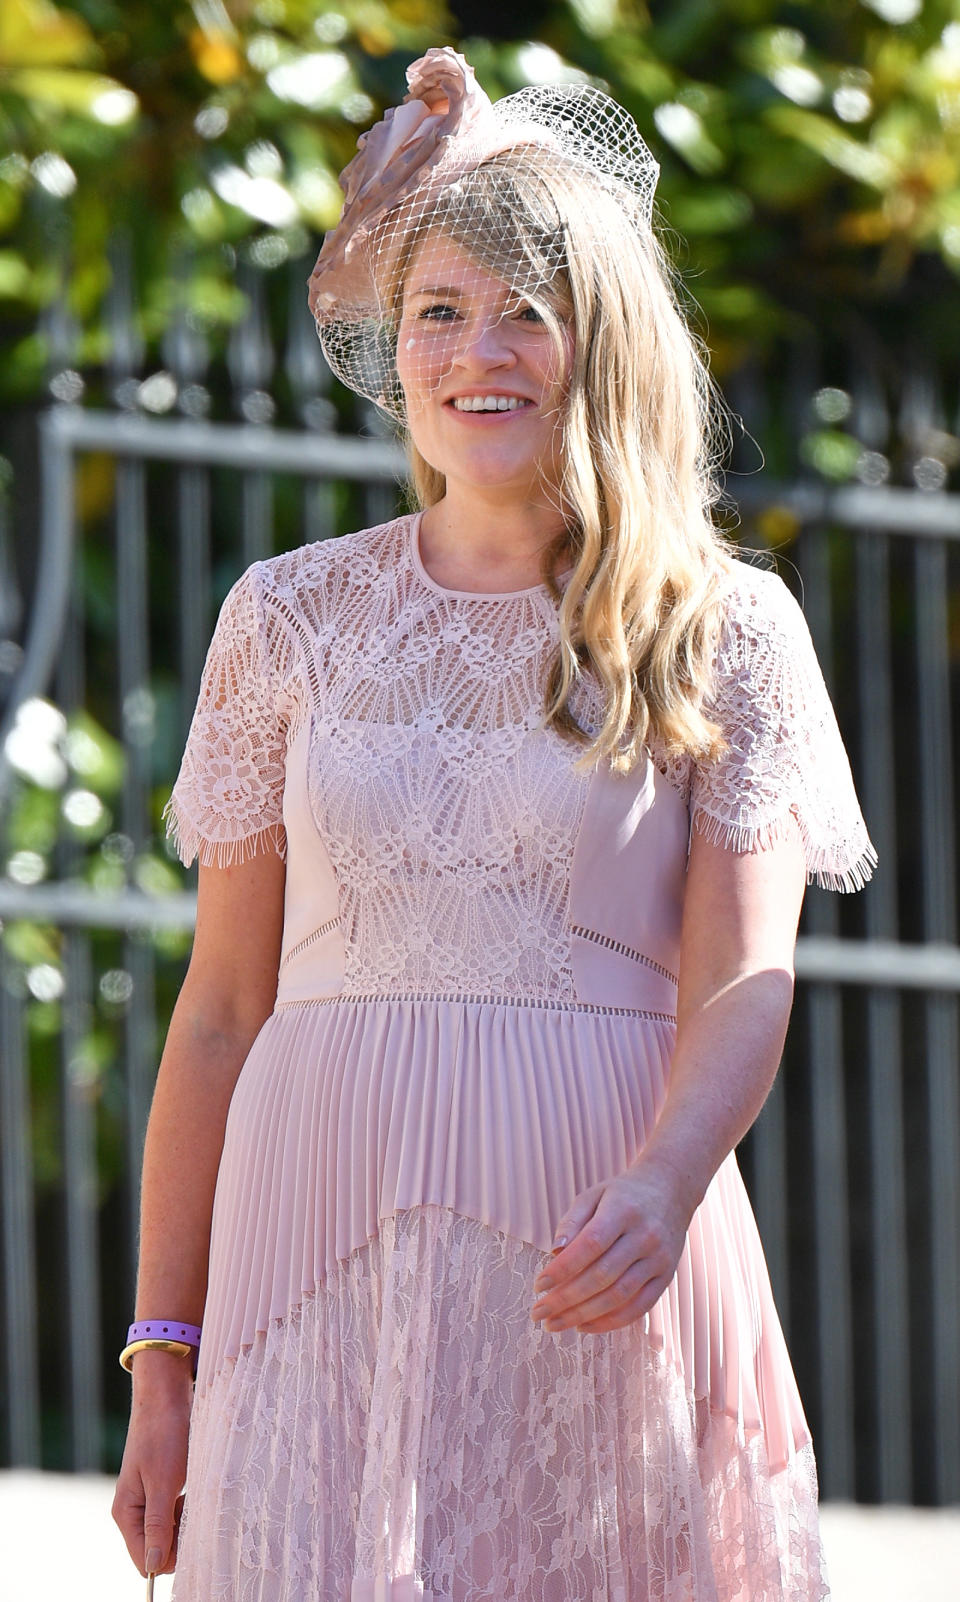 Amy Pickerill at the royal wedding. [Photo: Getty]